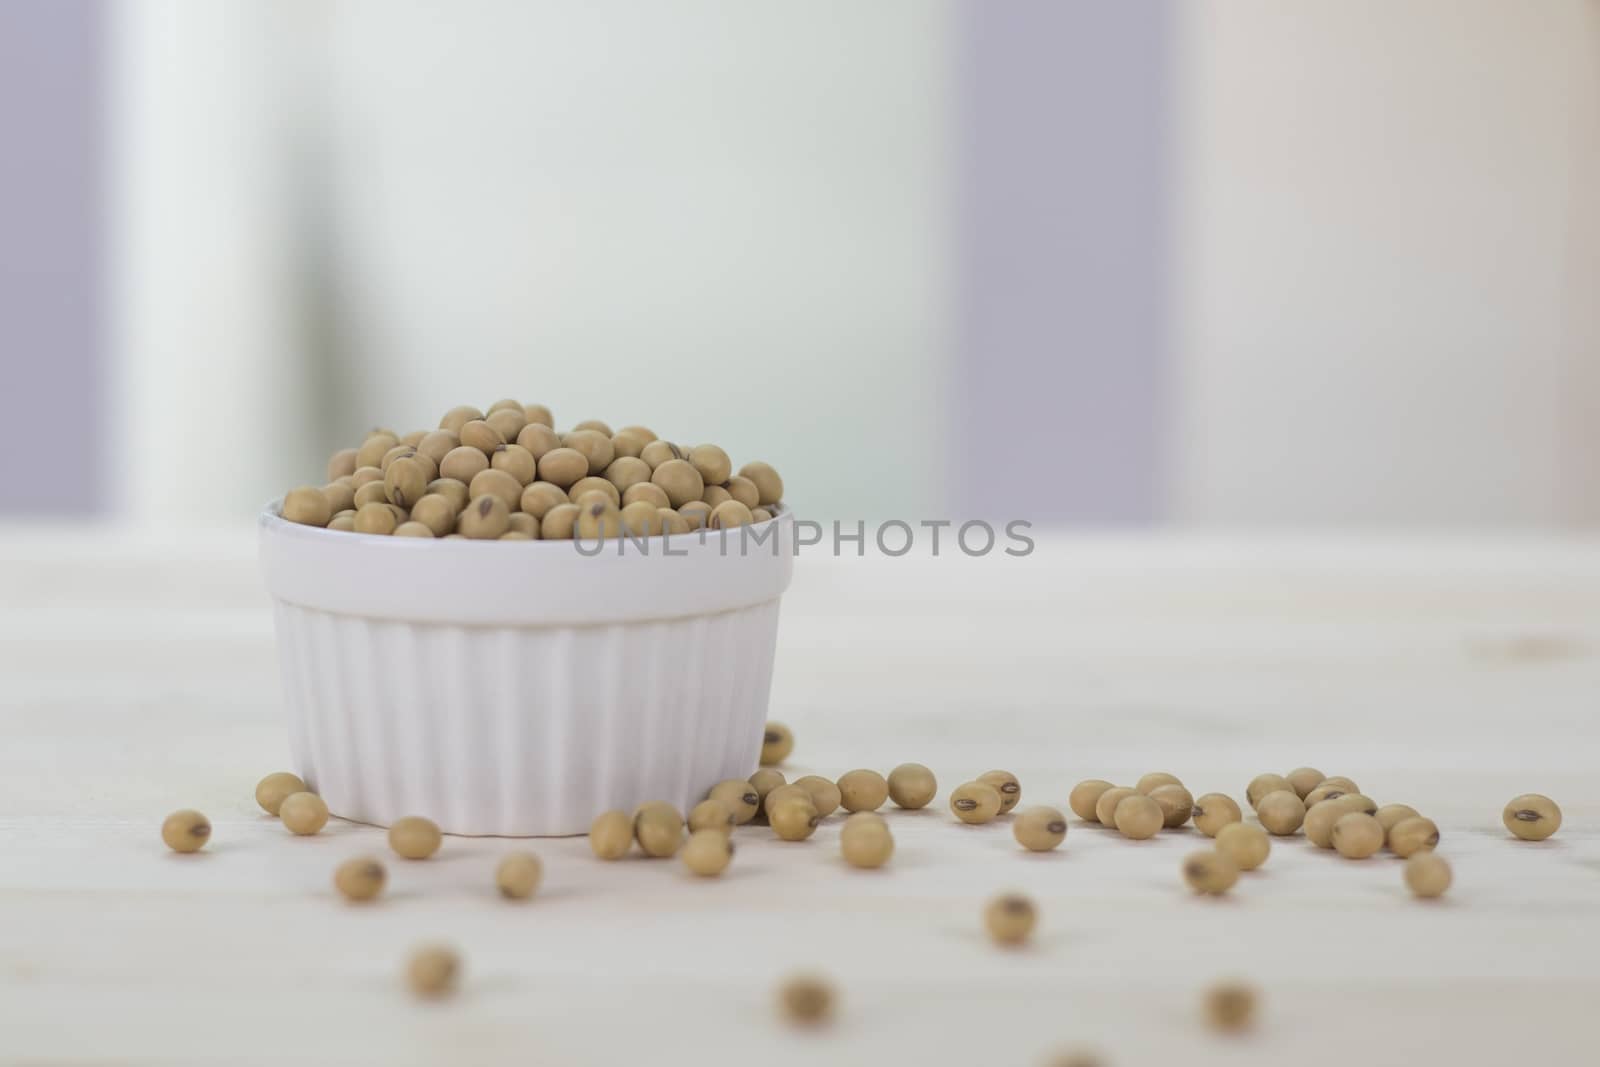 The soybeans are in the white cup placed on the wooden table.